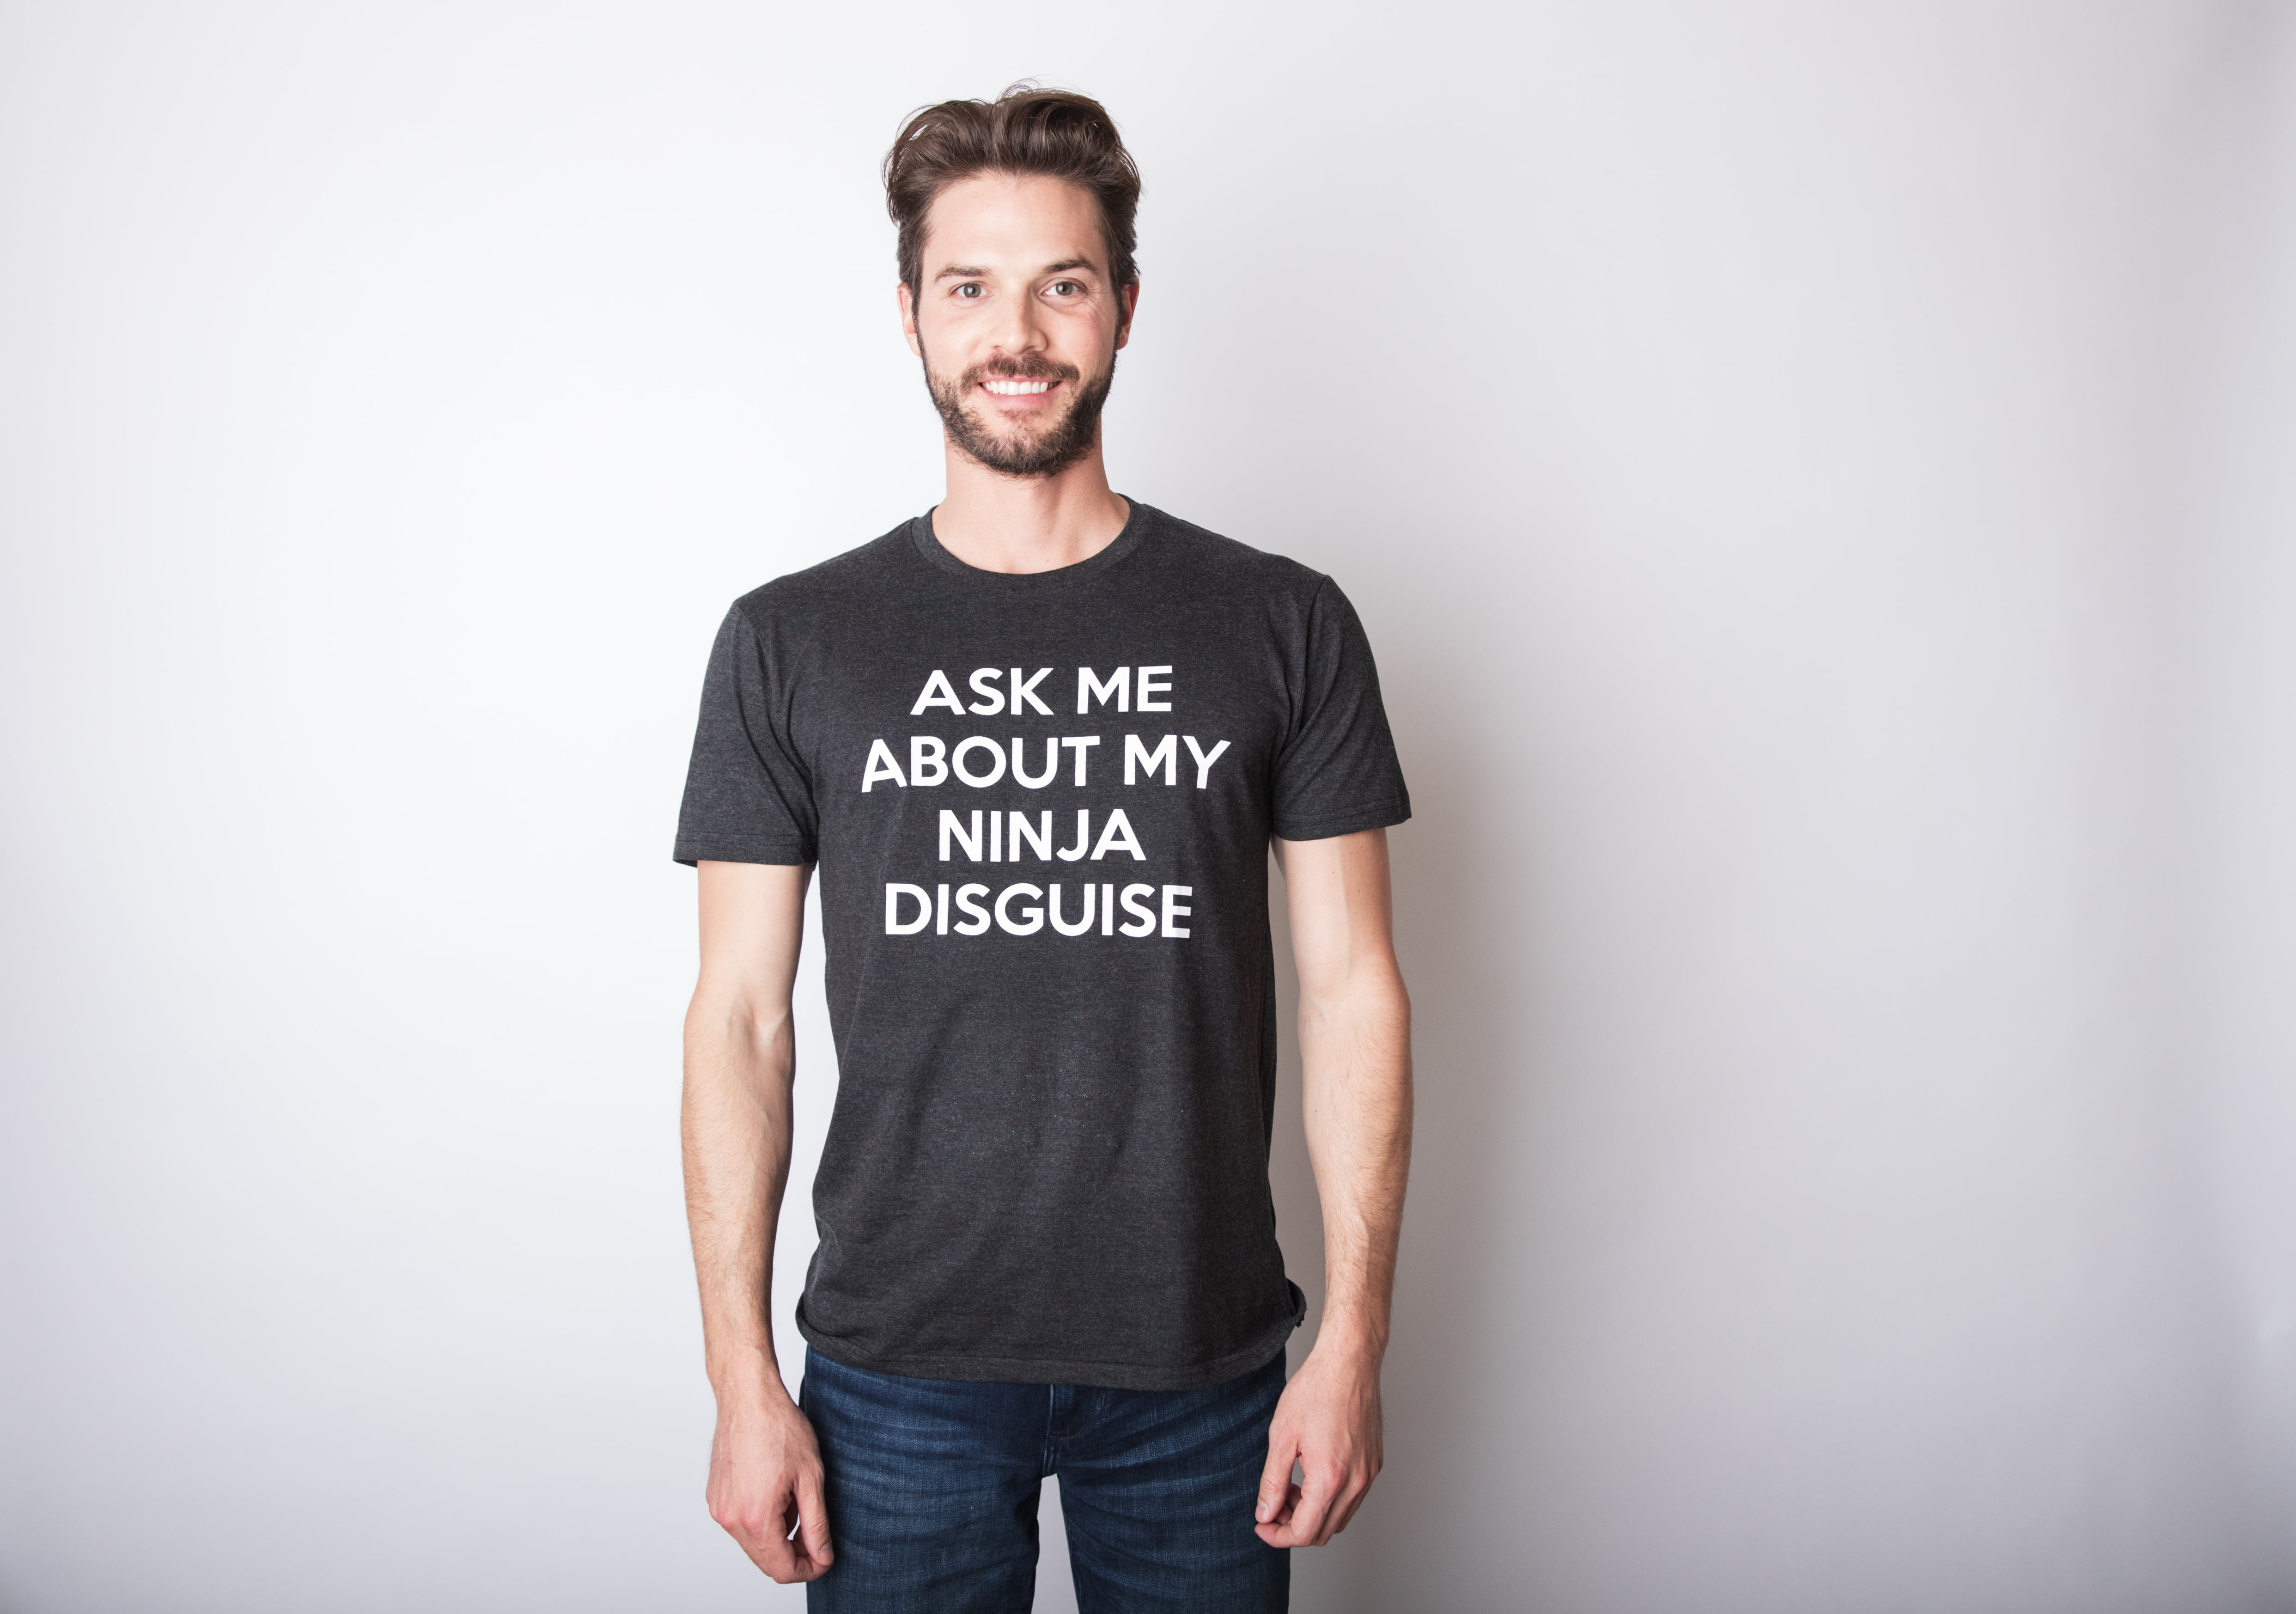 Mens Ask Me About Flip T shirt Costume Graphic Humor Tee (Black) - 3XL Graphic Tees - Walmart.com